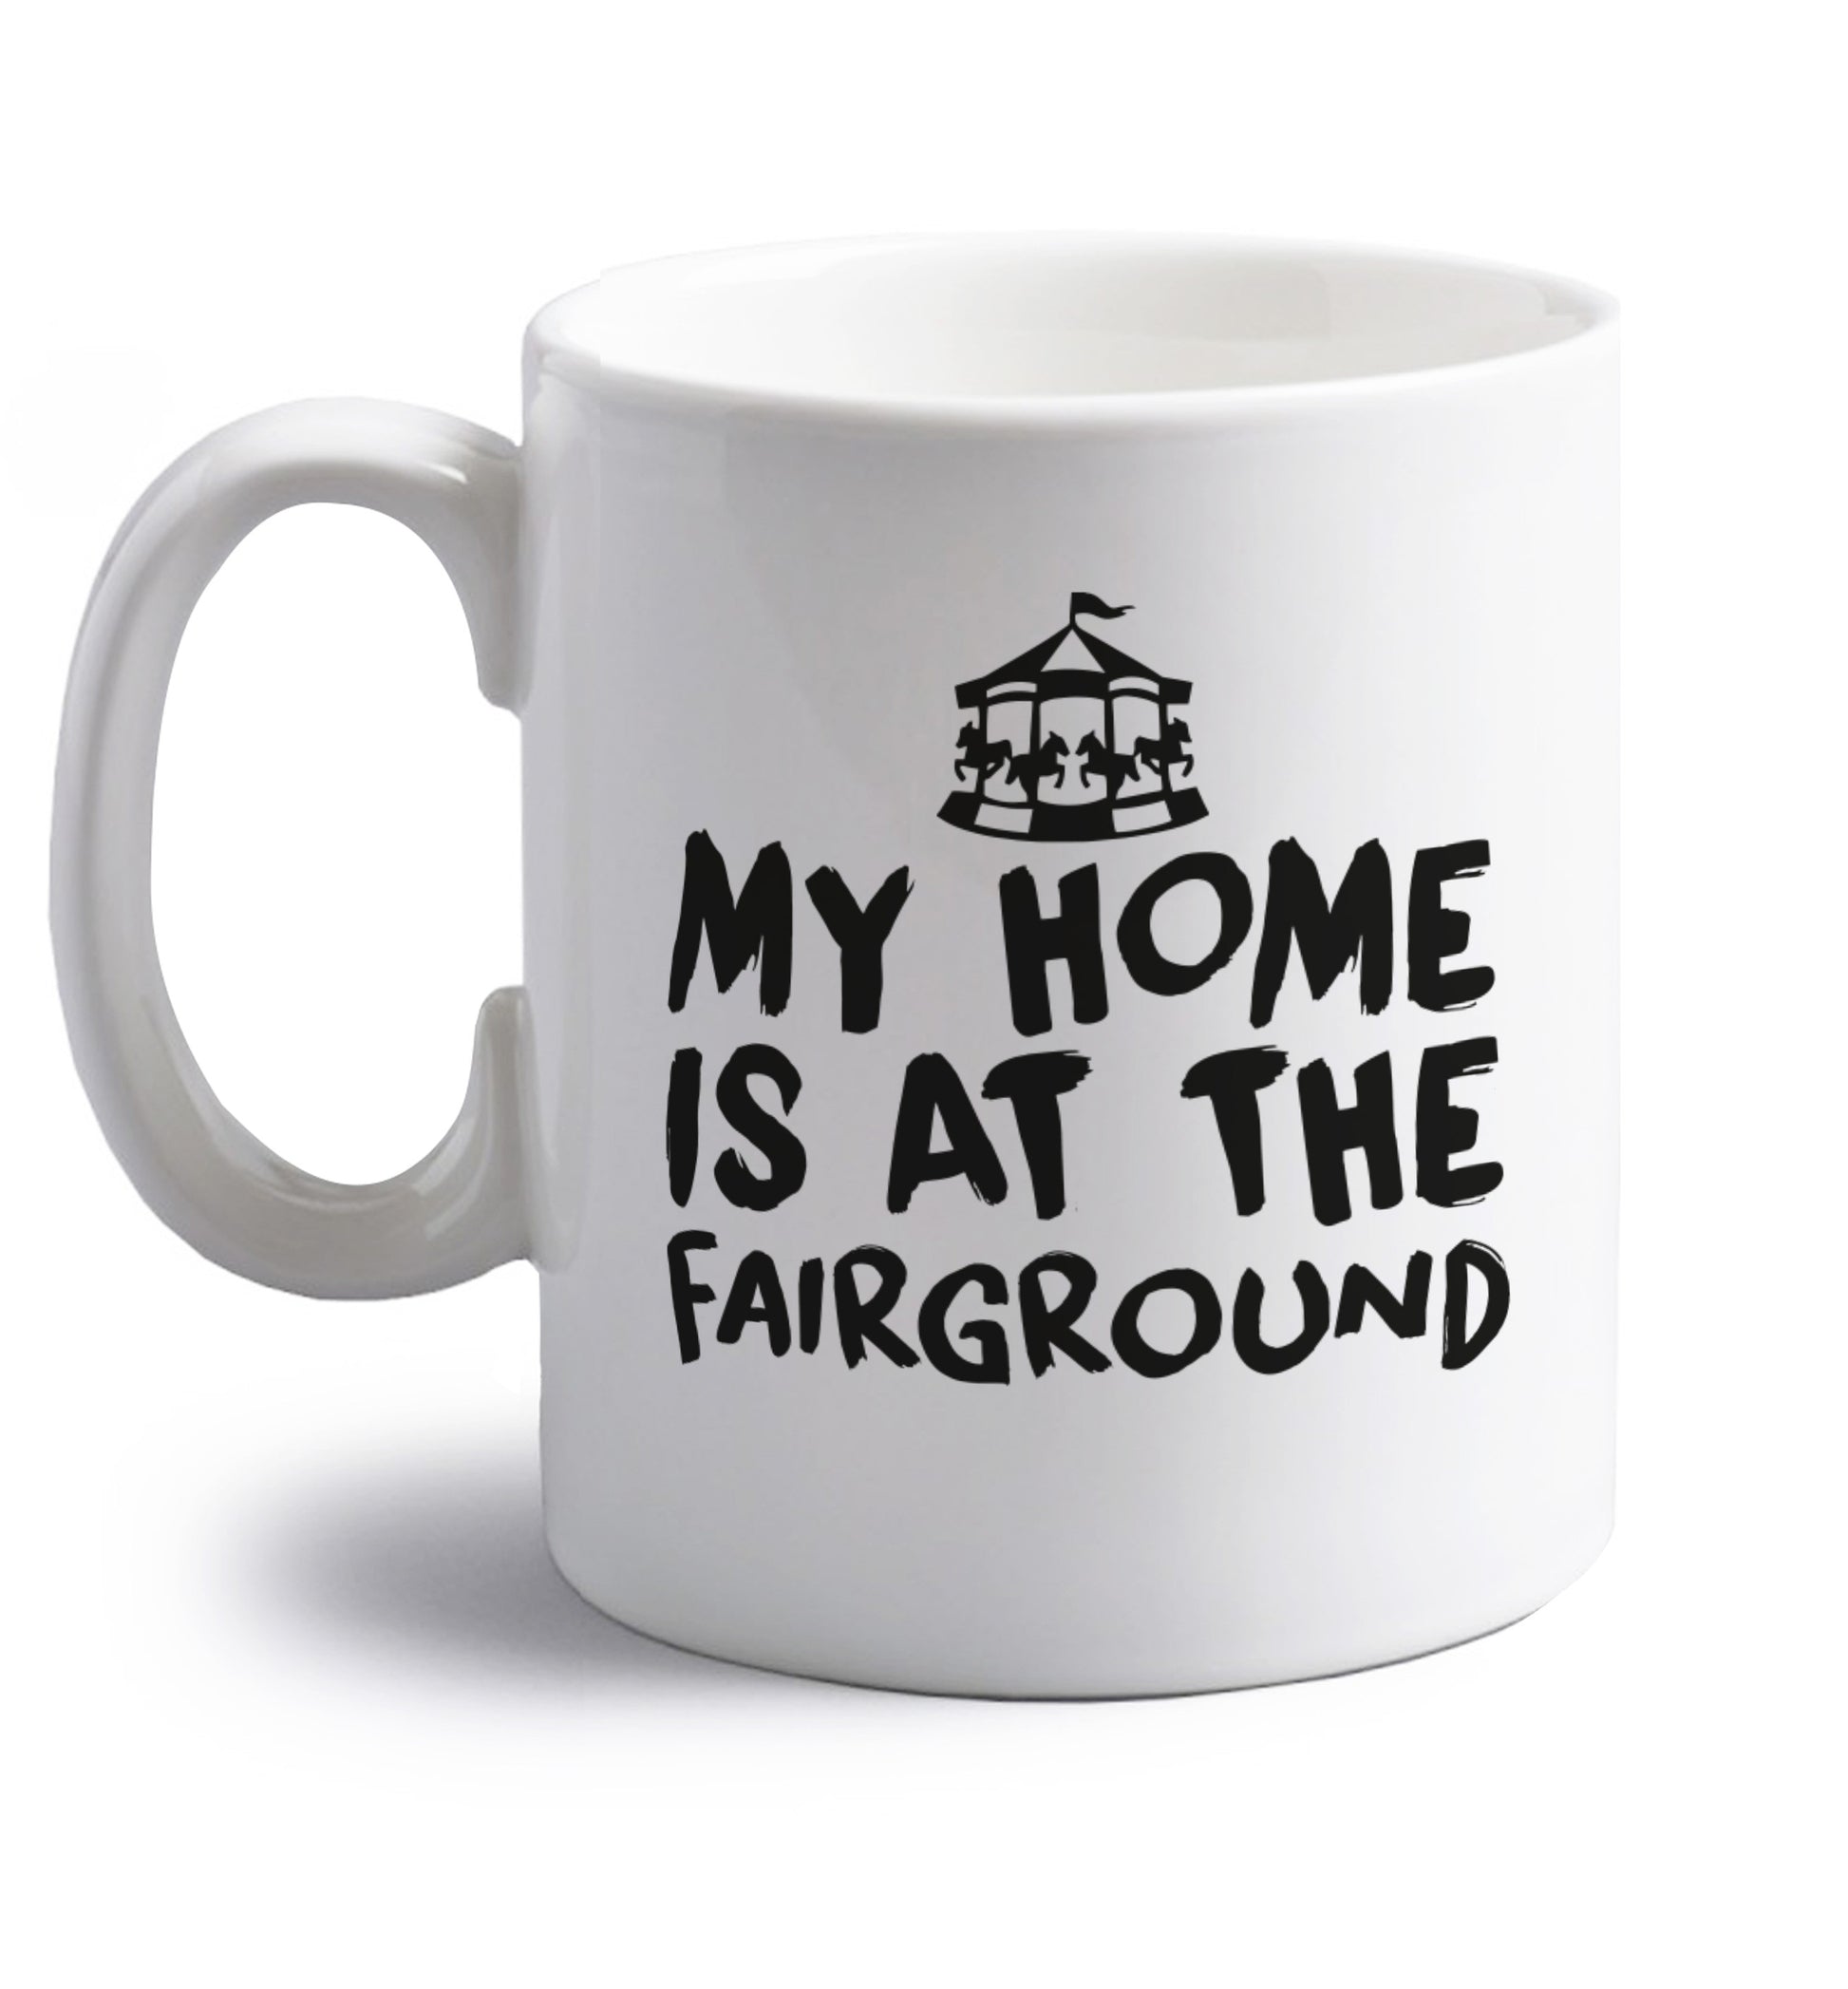 My home is at the fairground right handed white ceramic mug 